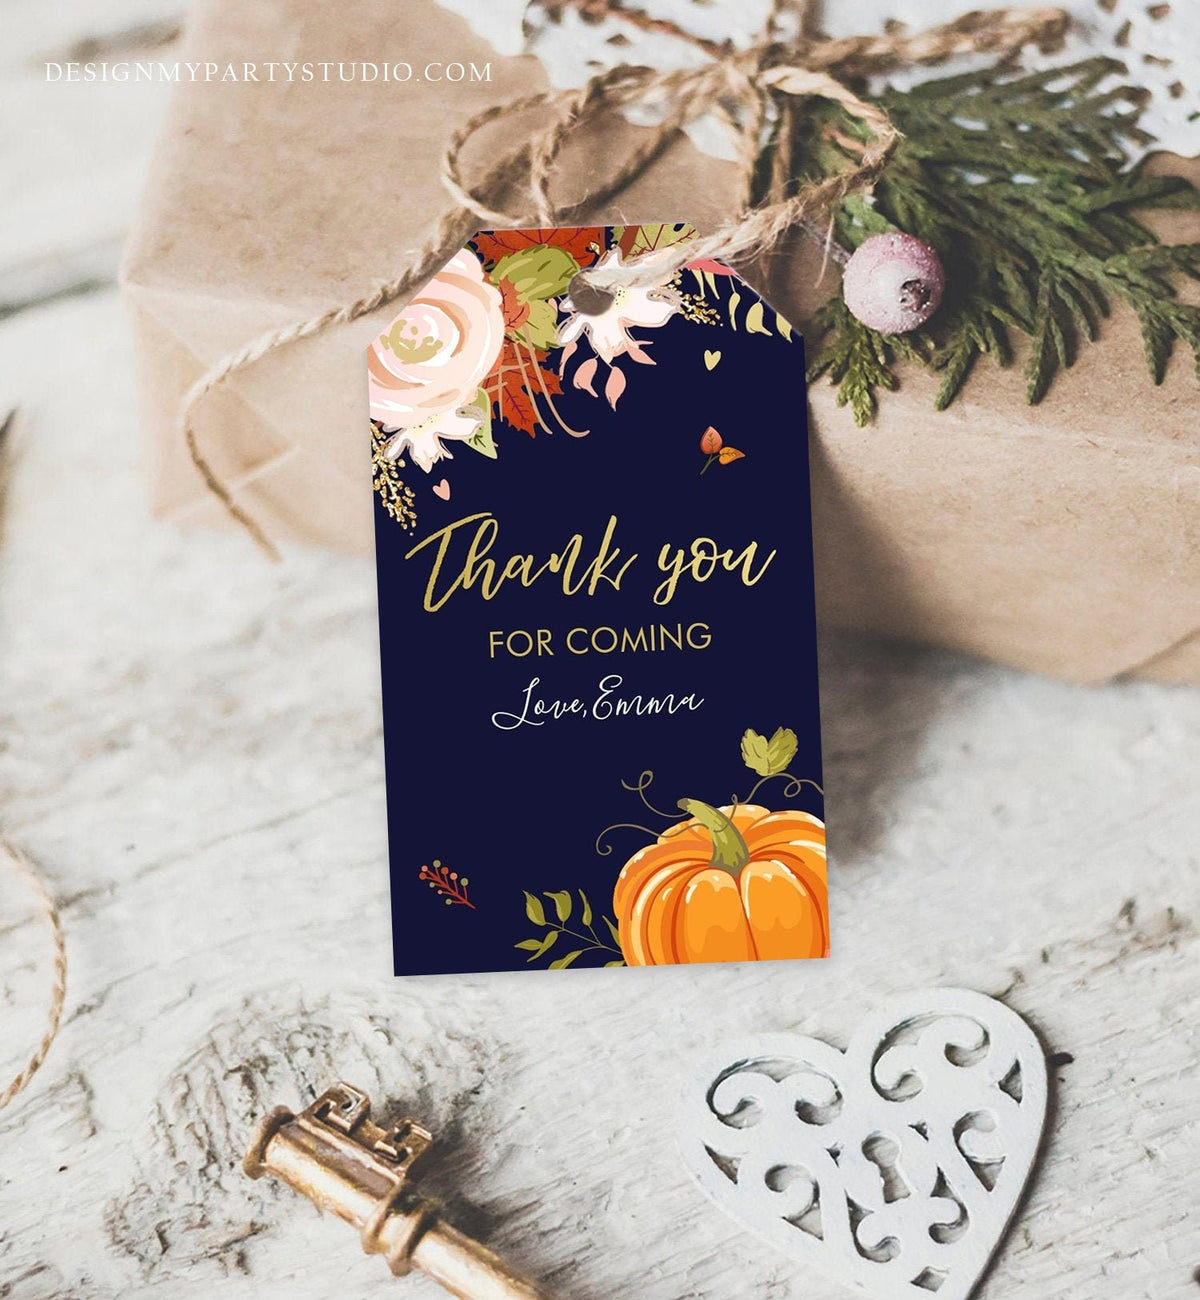 Editable Pumpkin Favor Tags Thank You Tag Fall In Love Bridal Shower A -  Design My Party Studio